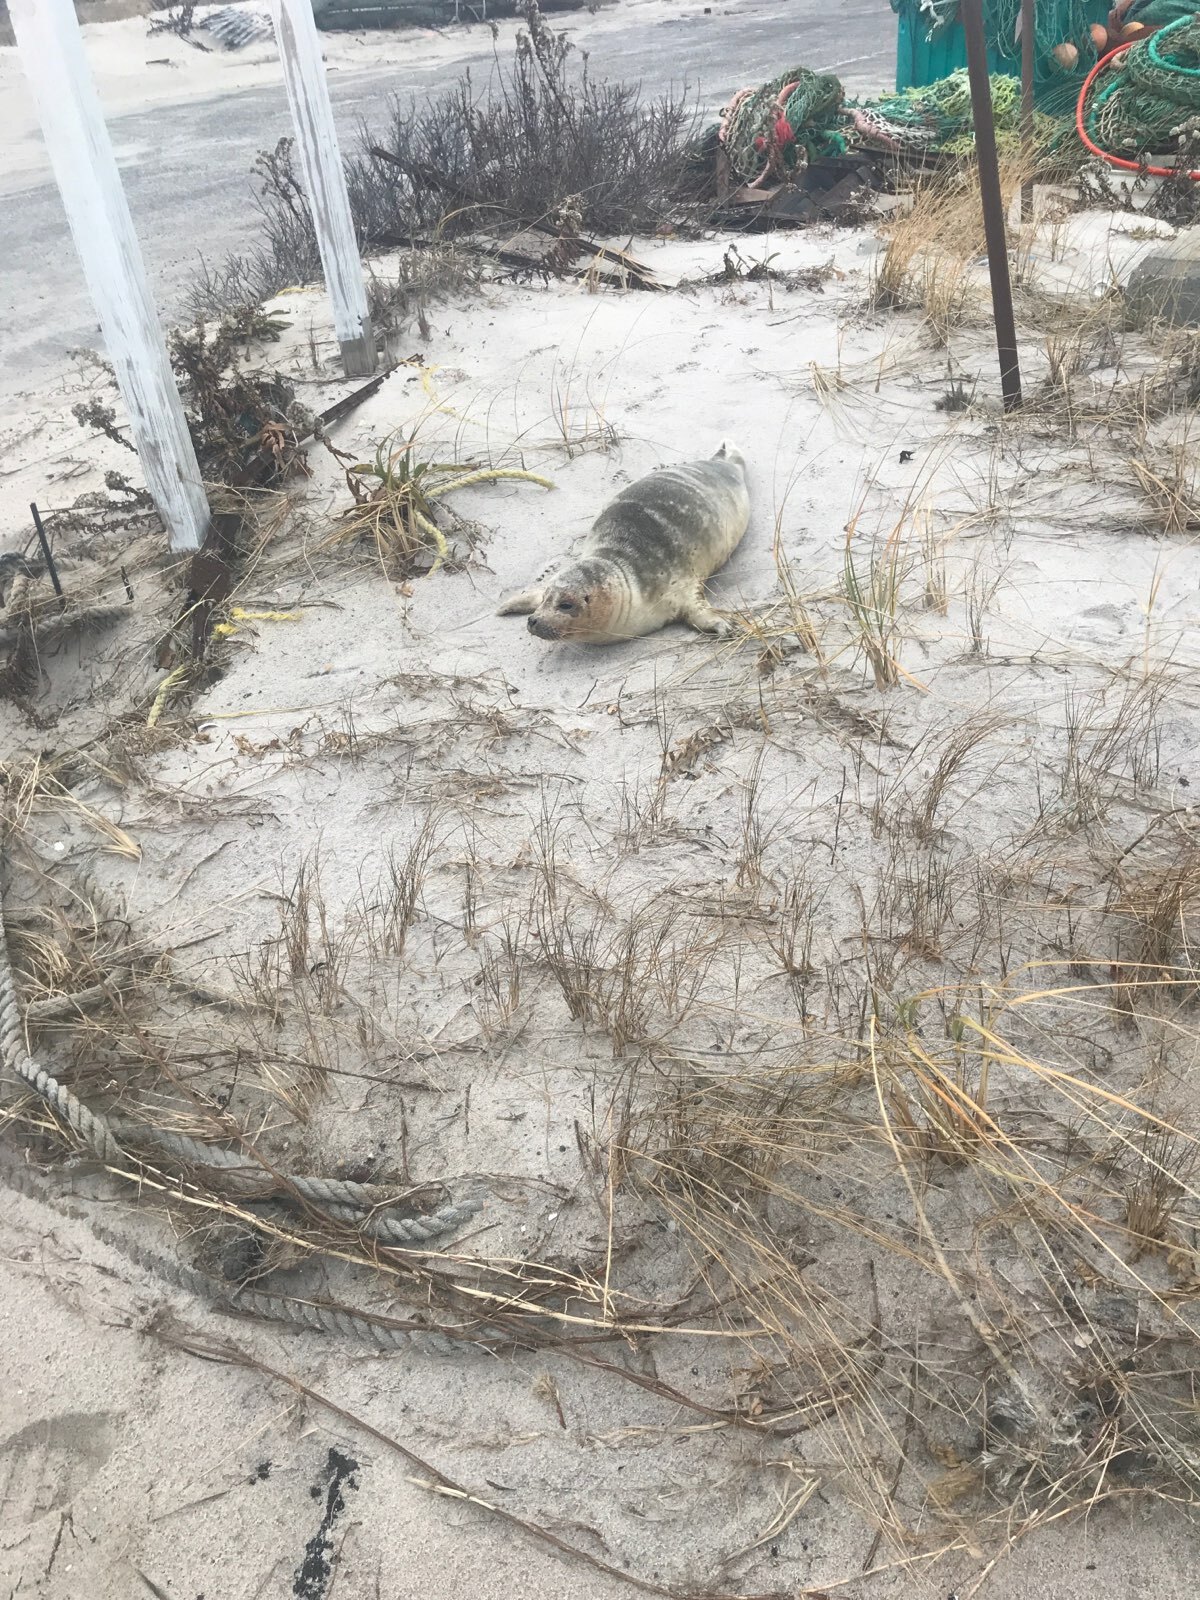 A seal became trapped near the Shinnecock Commercial Docks when a 30-foot section of dune breached nearby on Saturday night. COURTESY JAY SCHNEIDERMAN